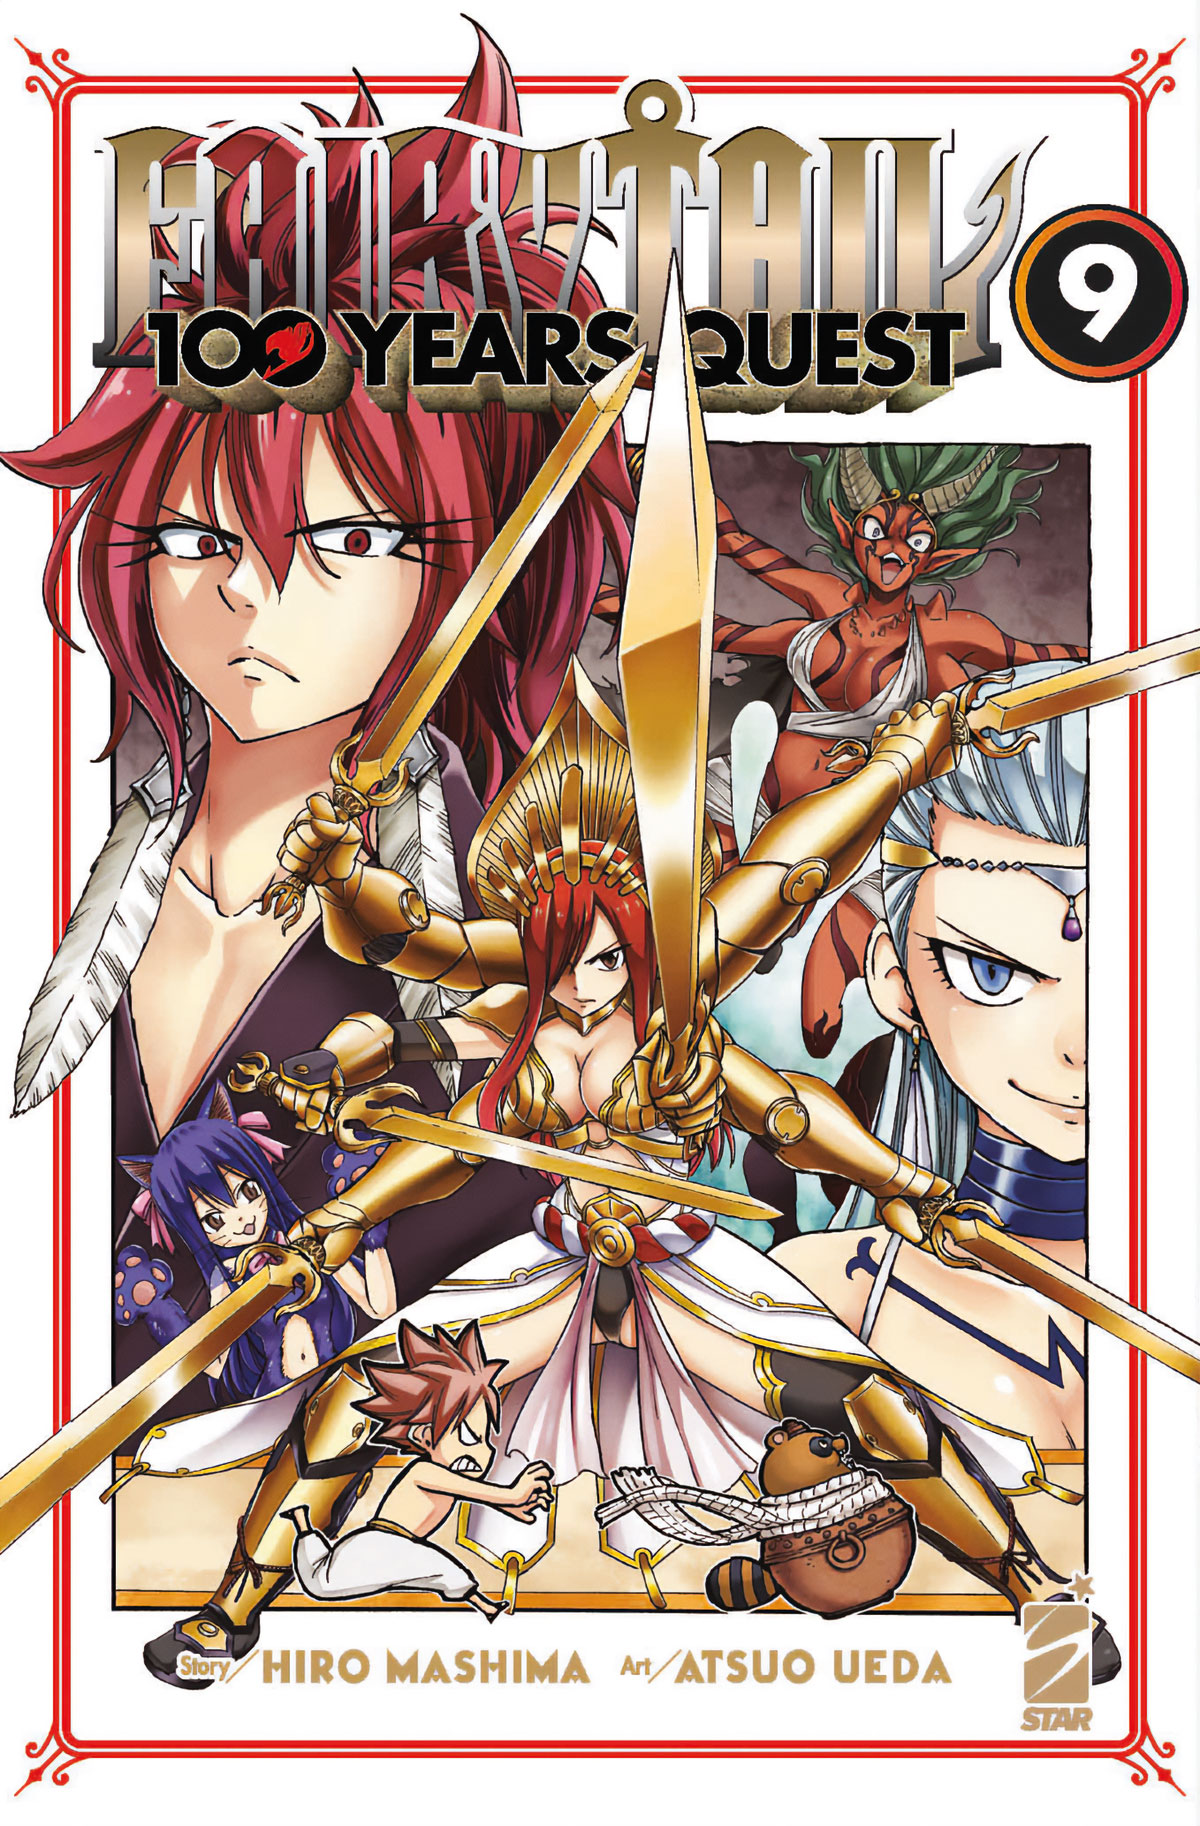 YOUNG #330 FAIRY TAIL 100 YEARS QUEST N.09